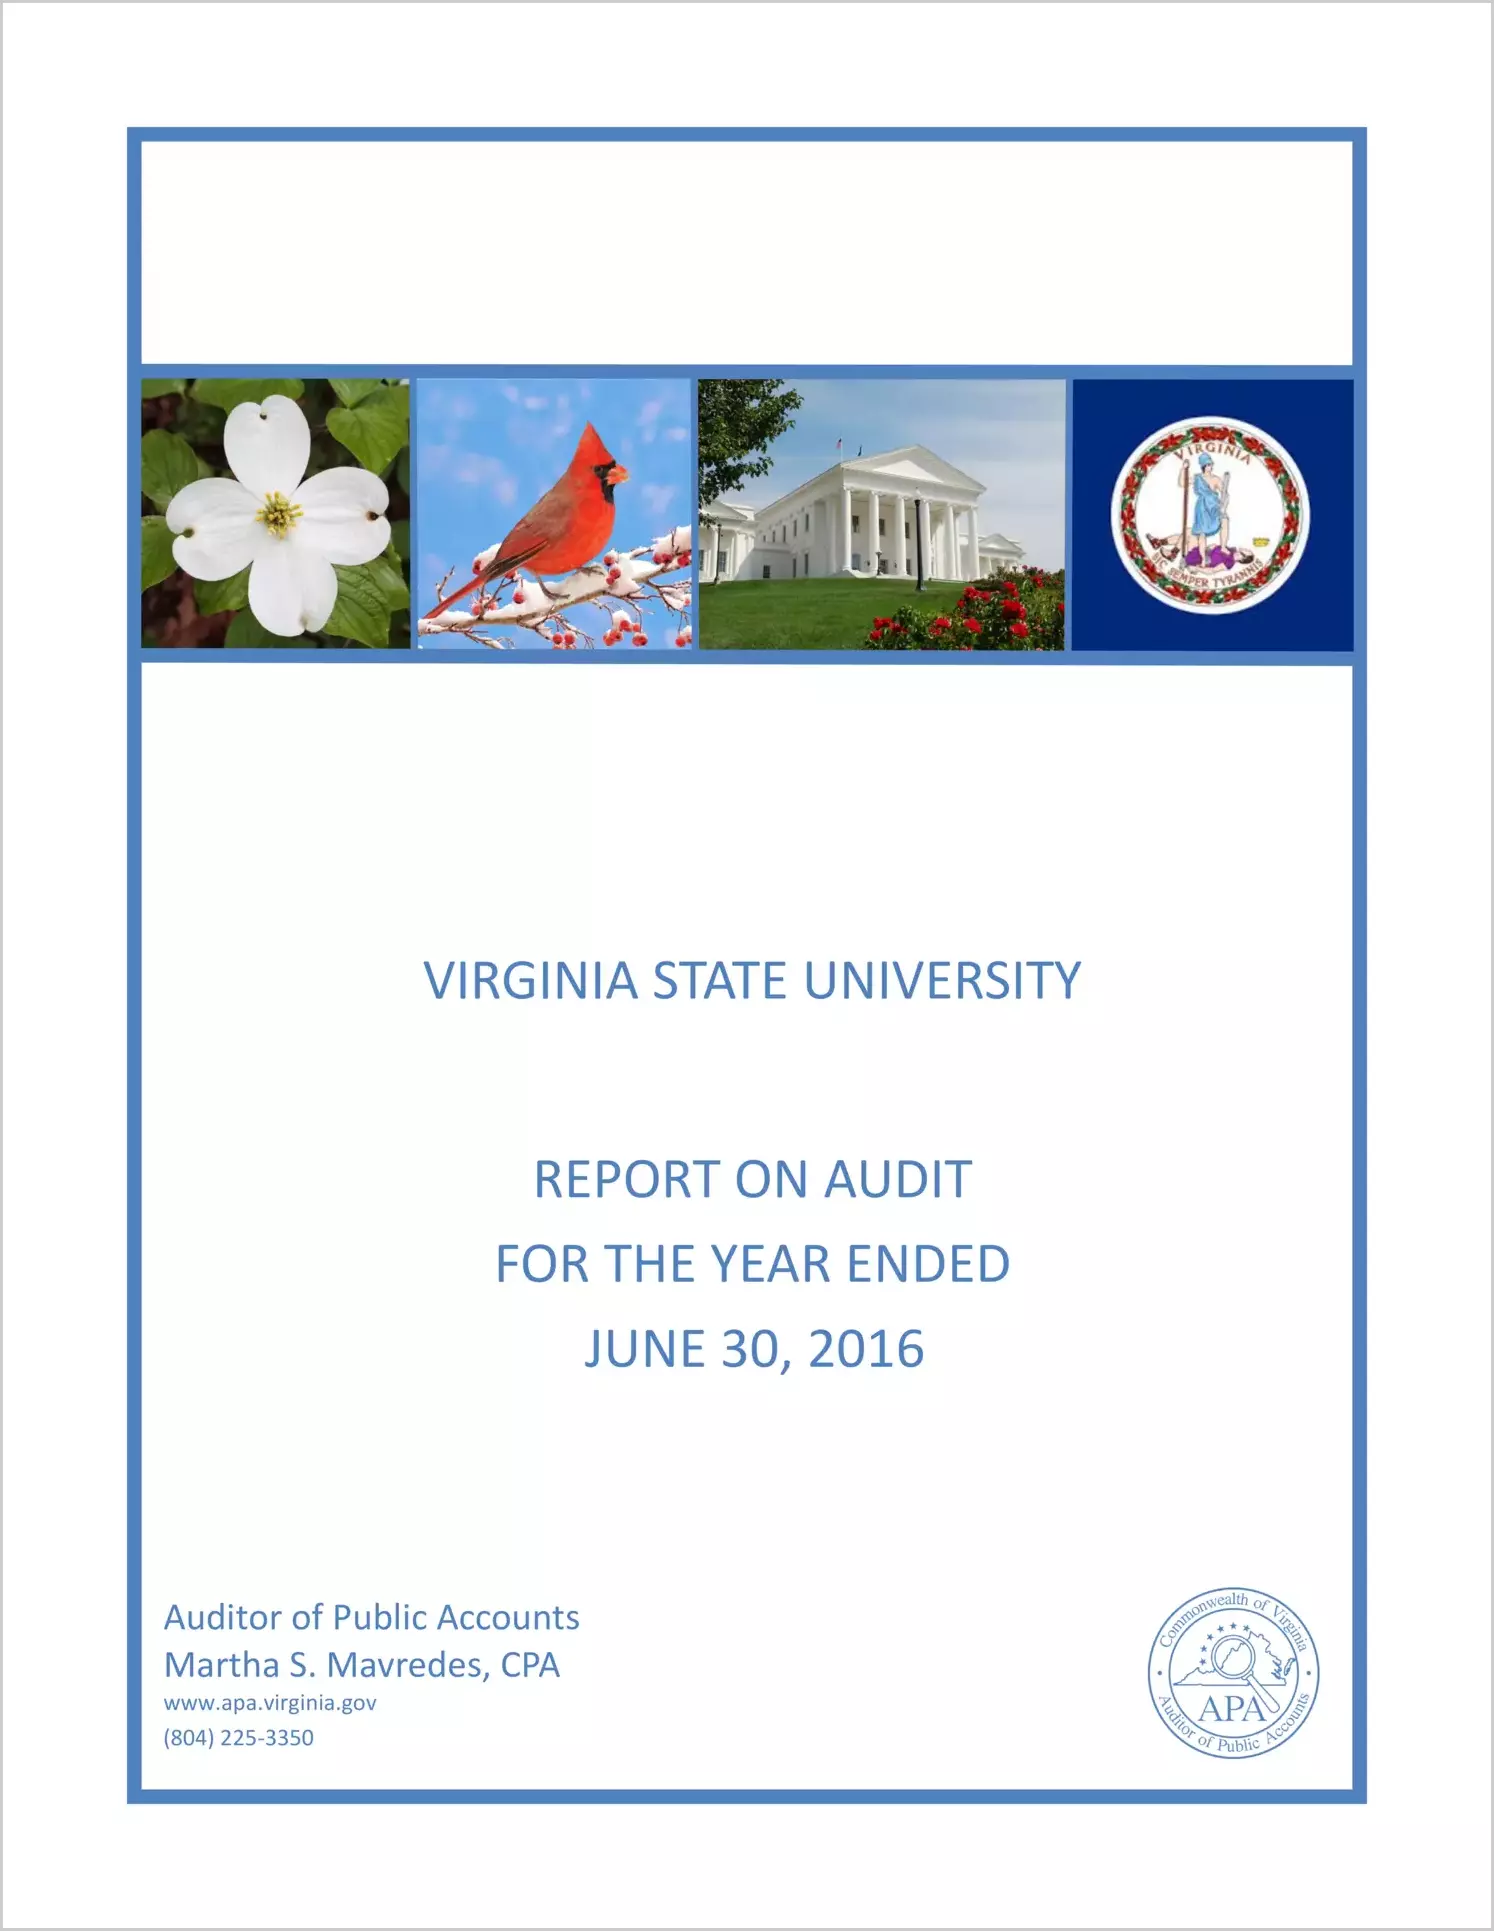 Virginia State University for the year ended June 30, 2016